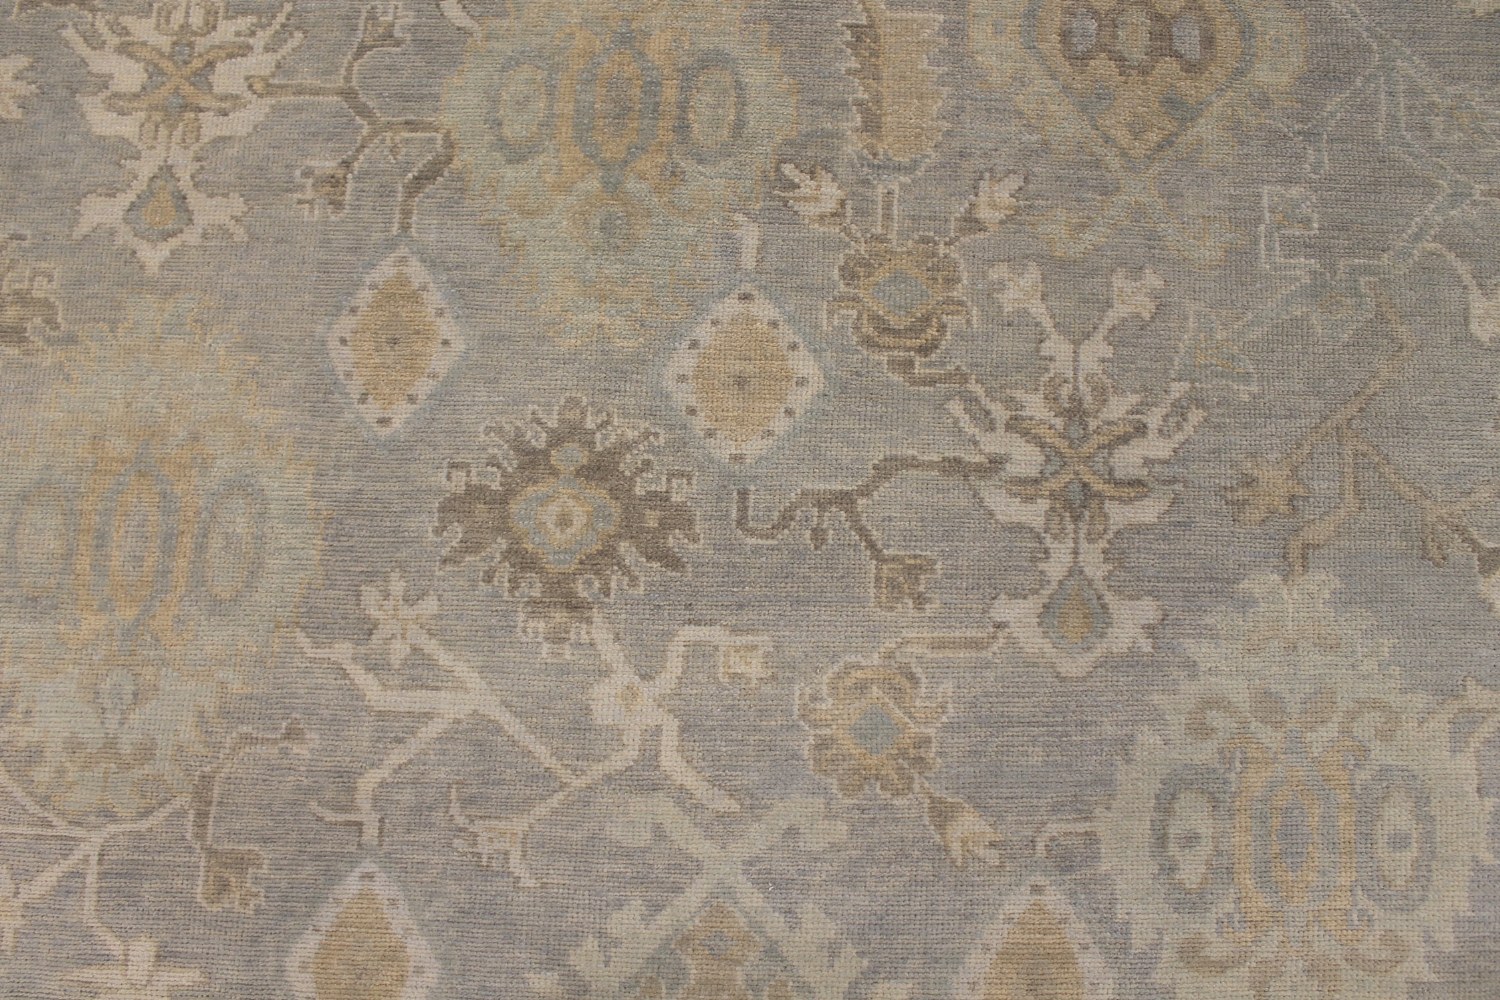 9x12 Oushak Hand Knotted Wool Area Rug - MR028077